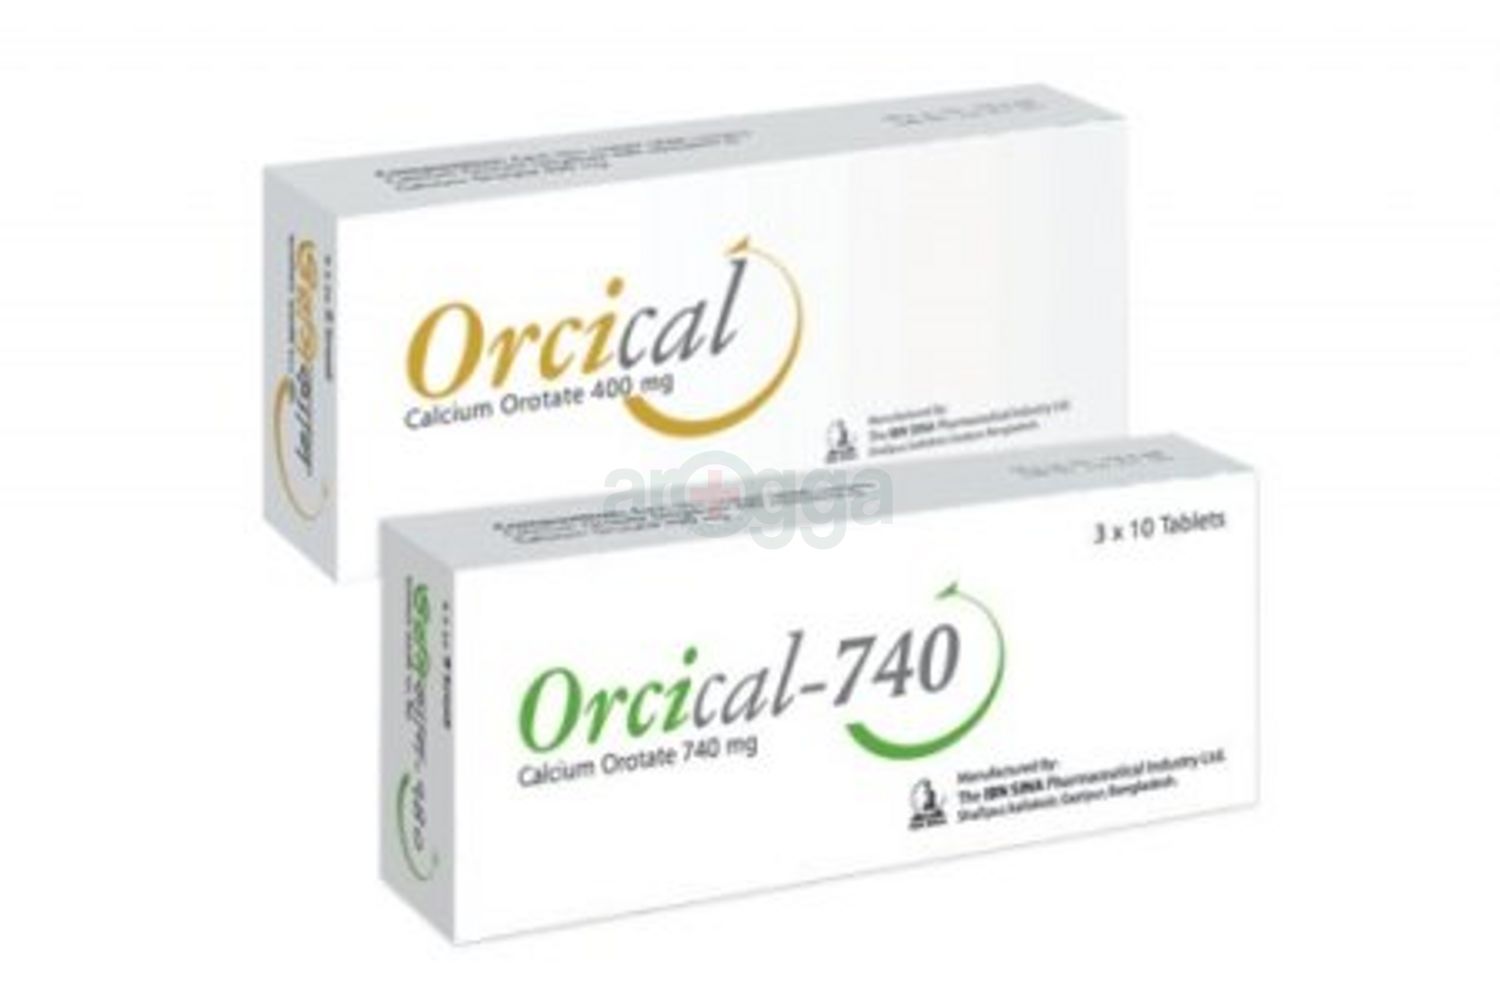 Orcical 740